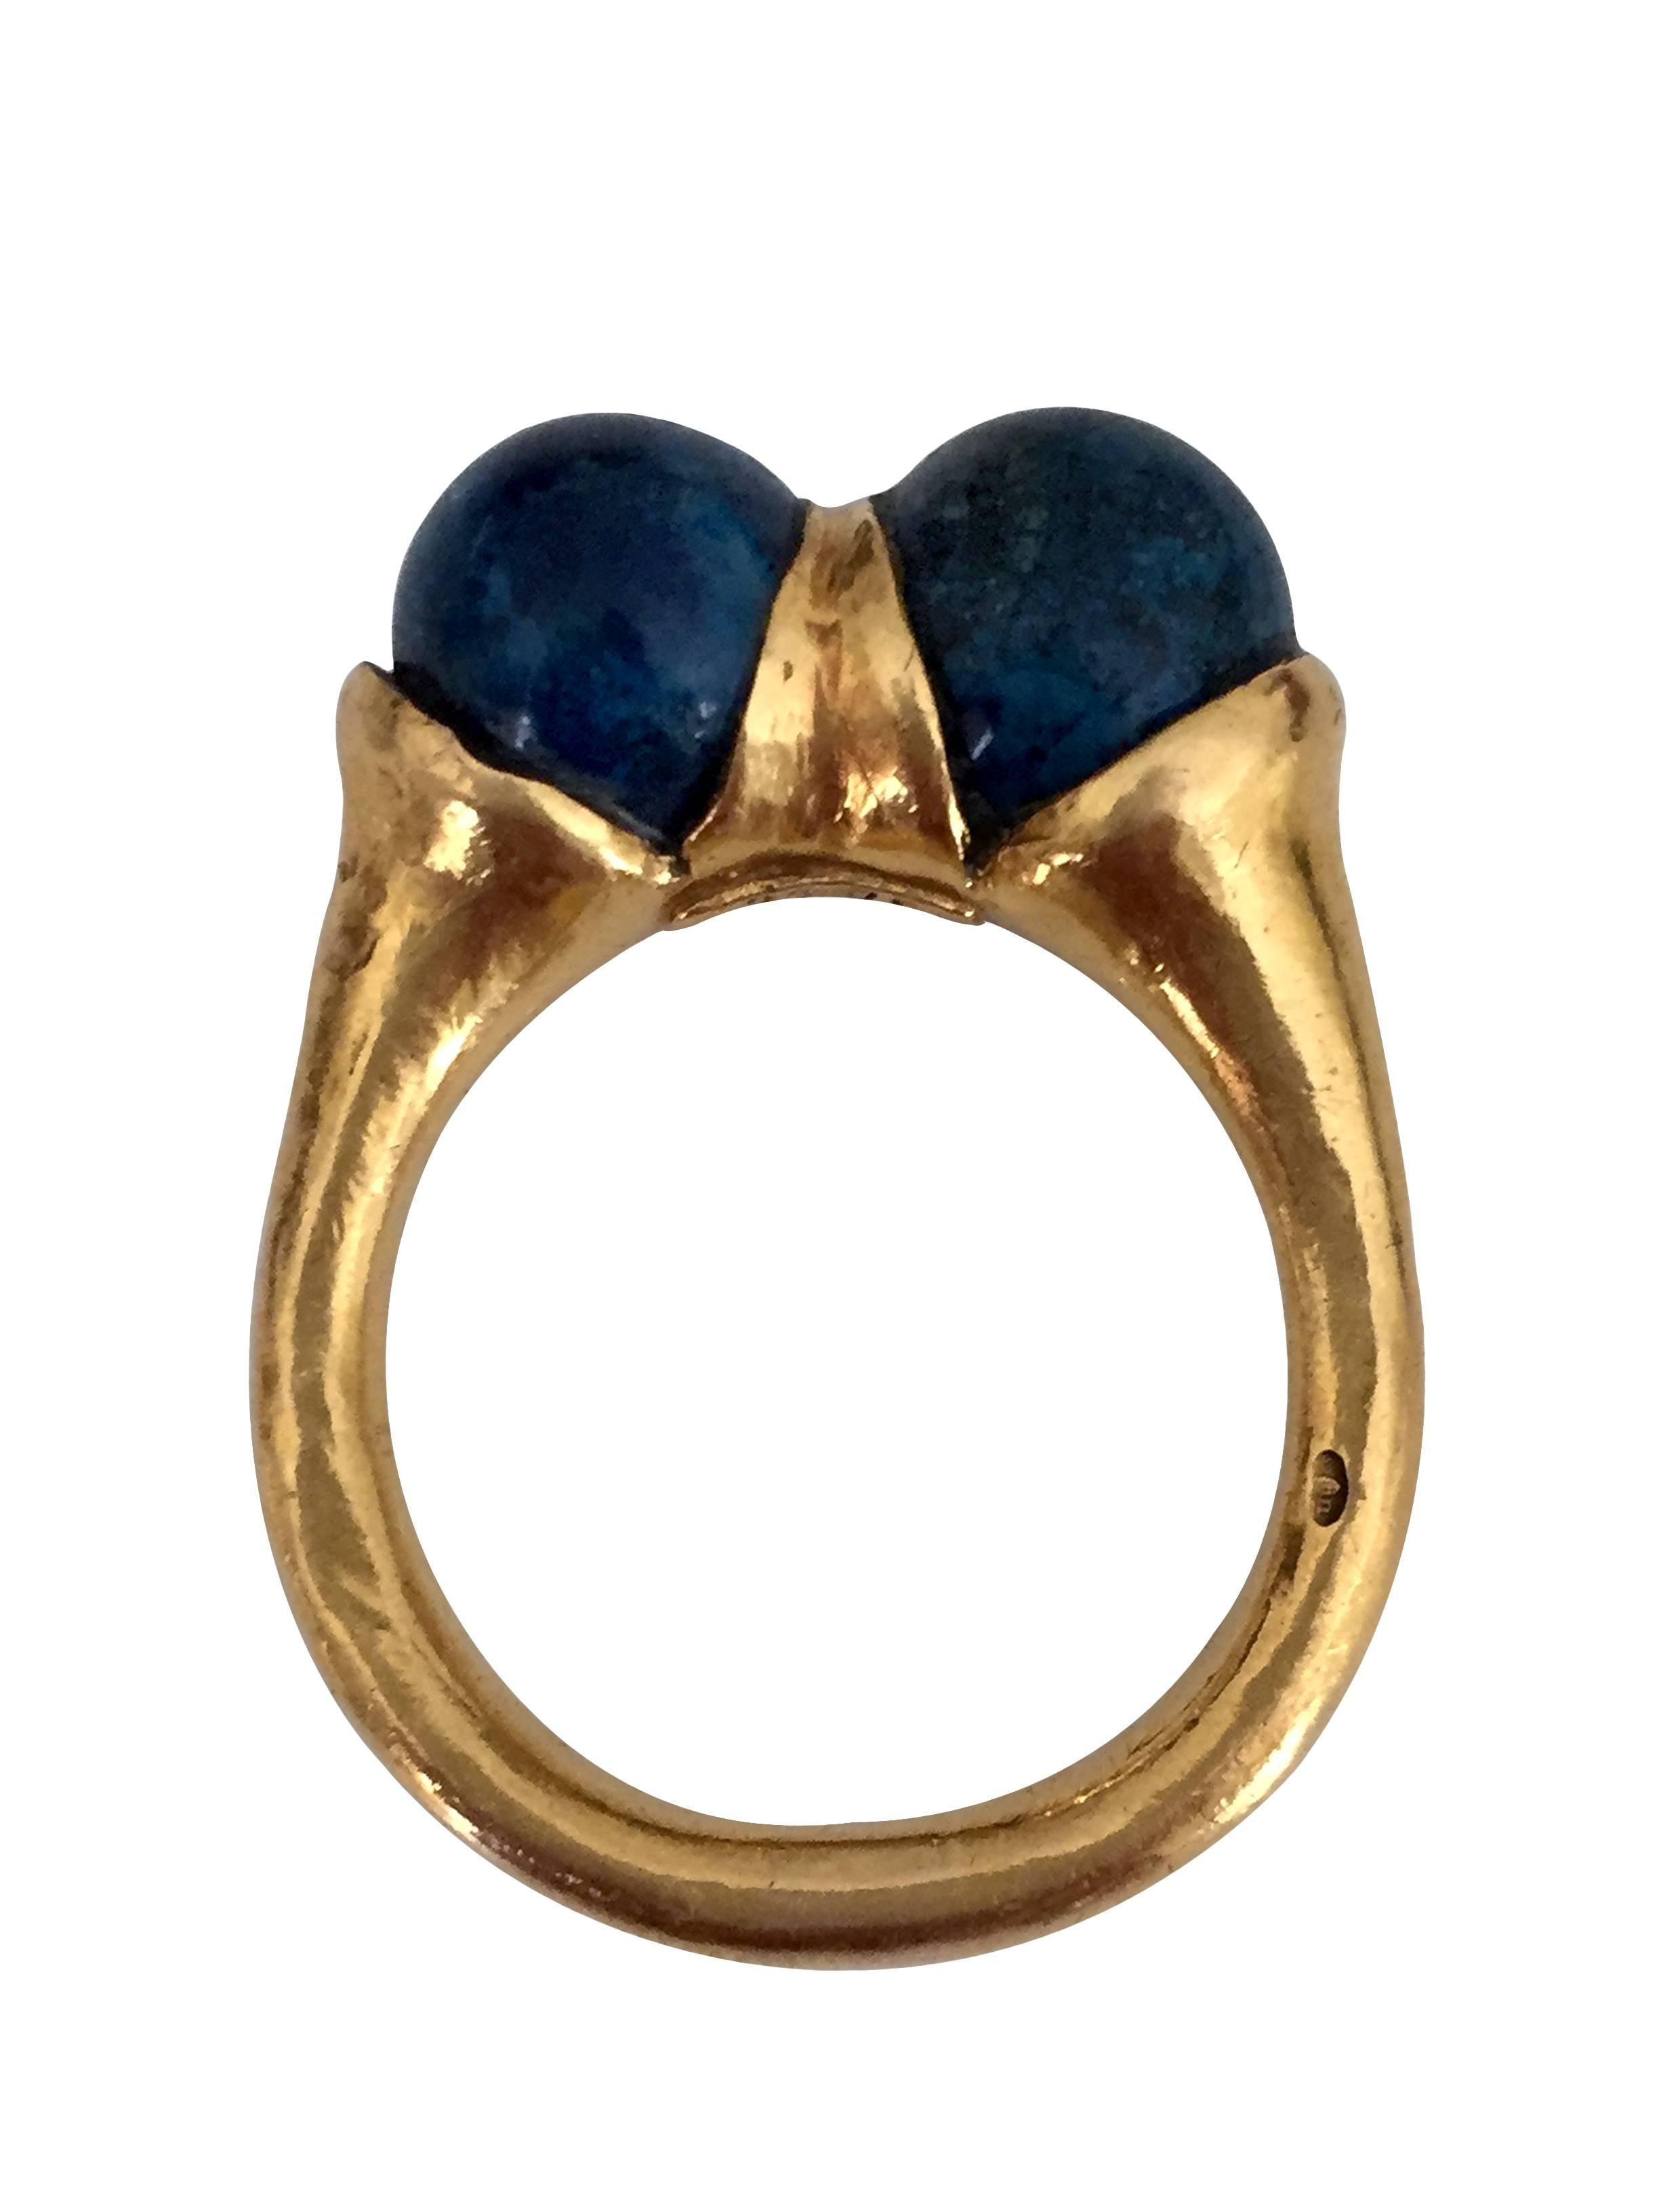 A sodalite and 18k yellow gold ring, by Lalaounis 
Signed Lalaounis
Size : 51
